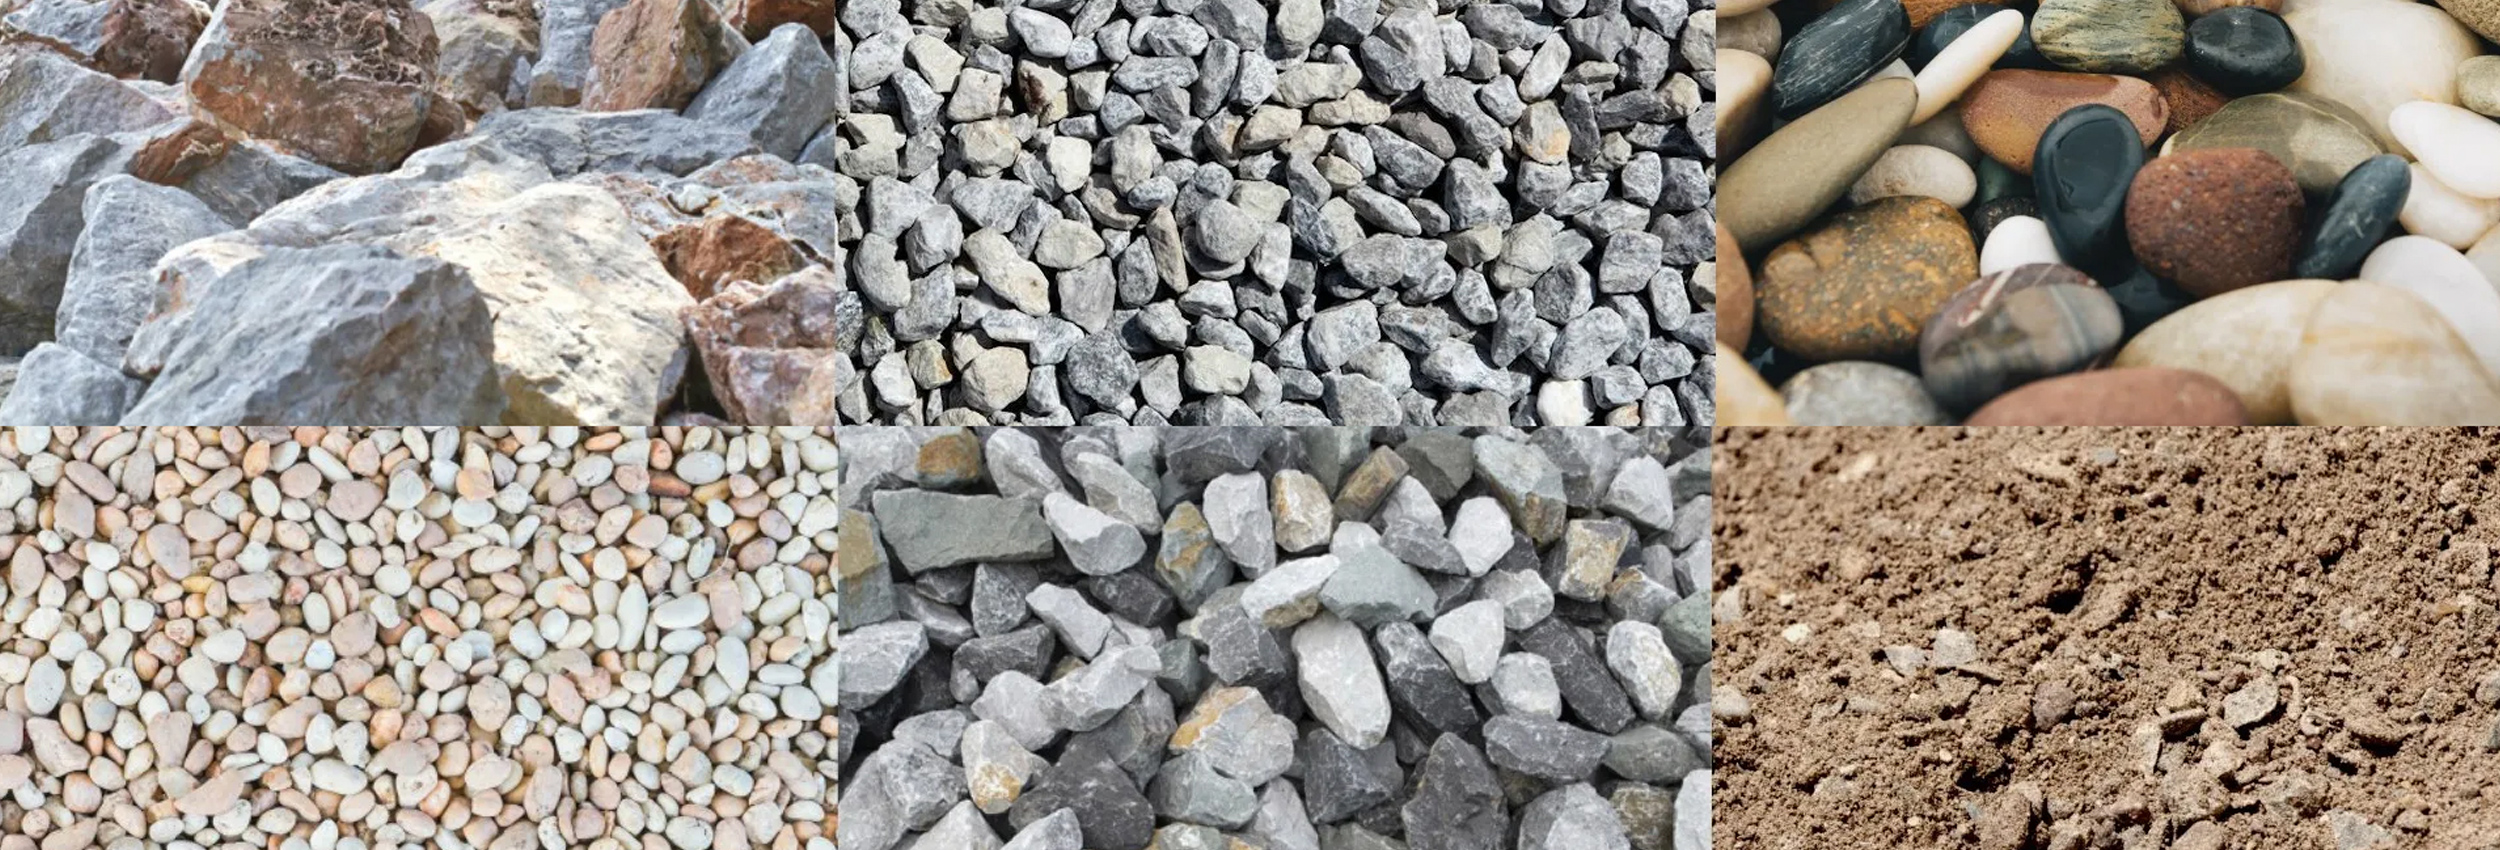 Aggregate supply and delivery, Gristle Ltd, Sussex, Surrey, UK